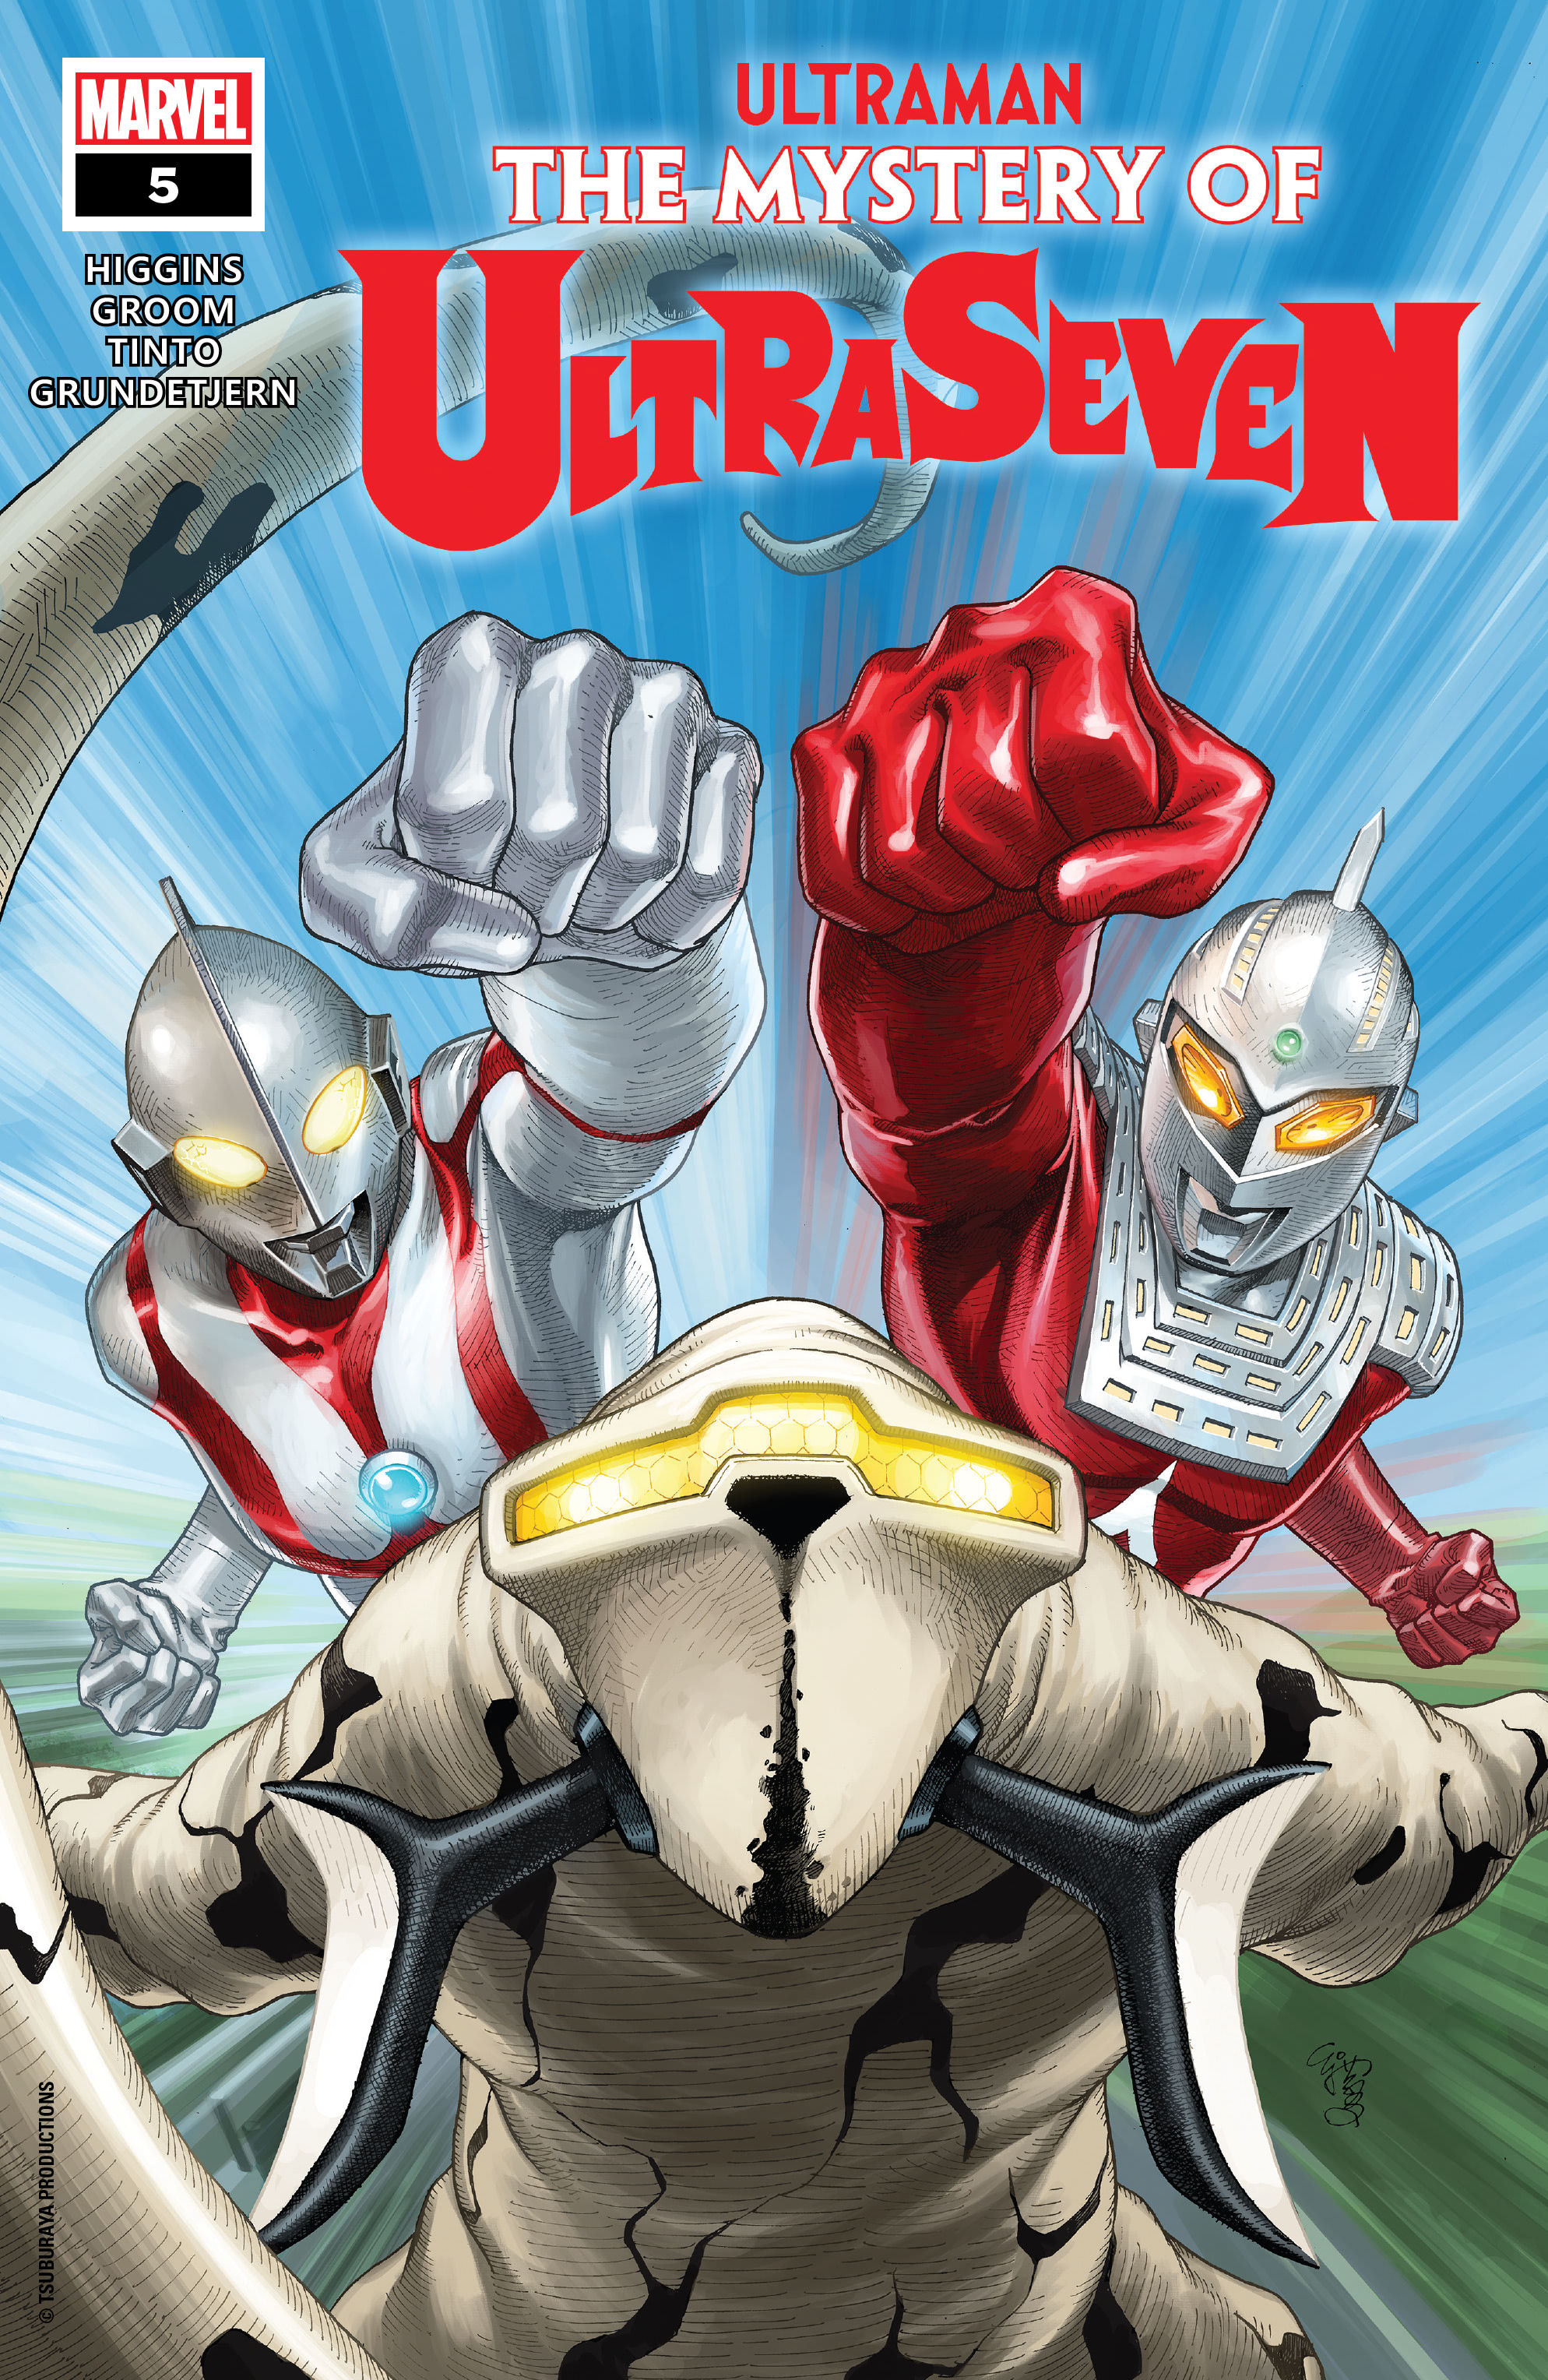 Read online Ultraman: The Mystery of Ultraseven comic -  Issue #5 - 1